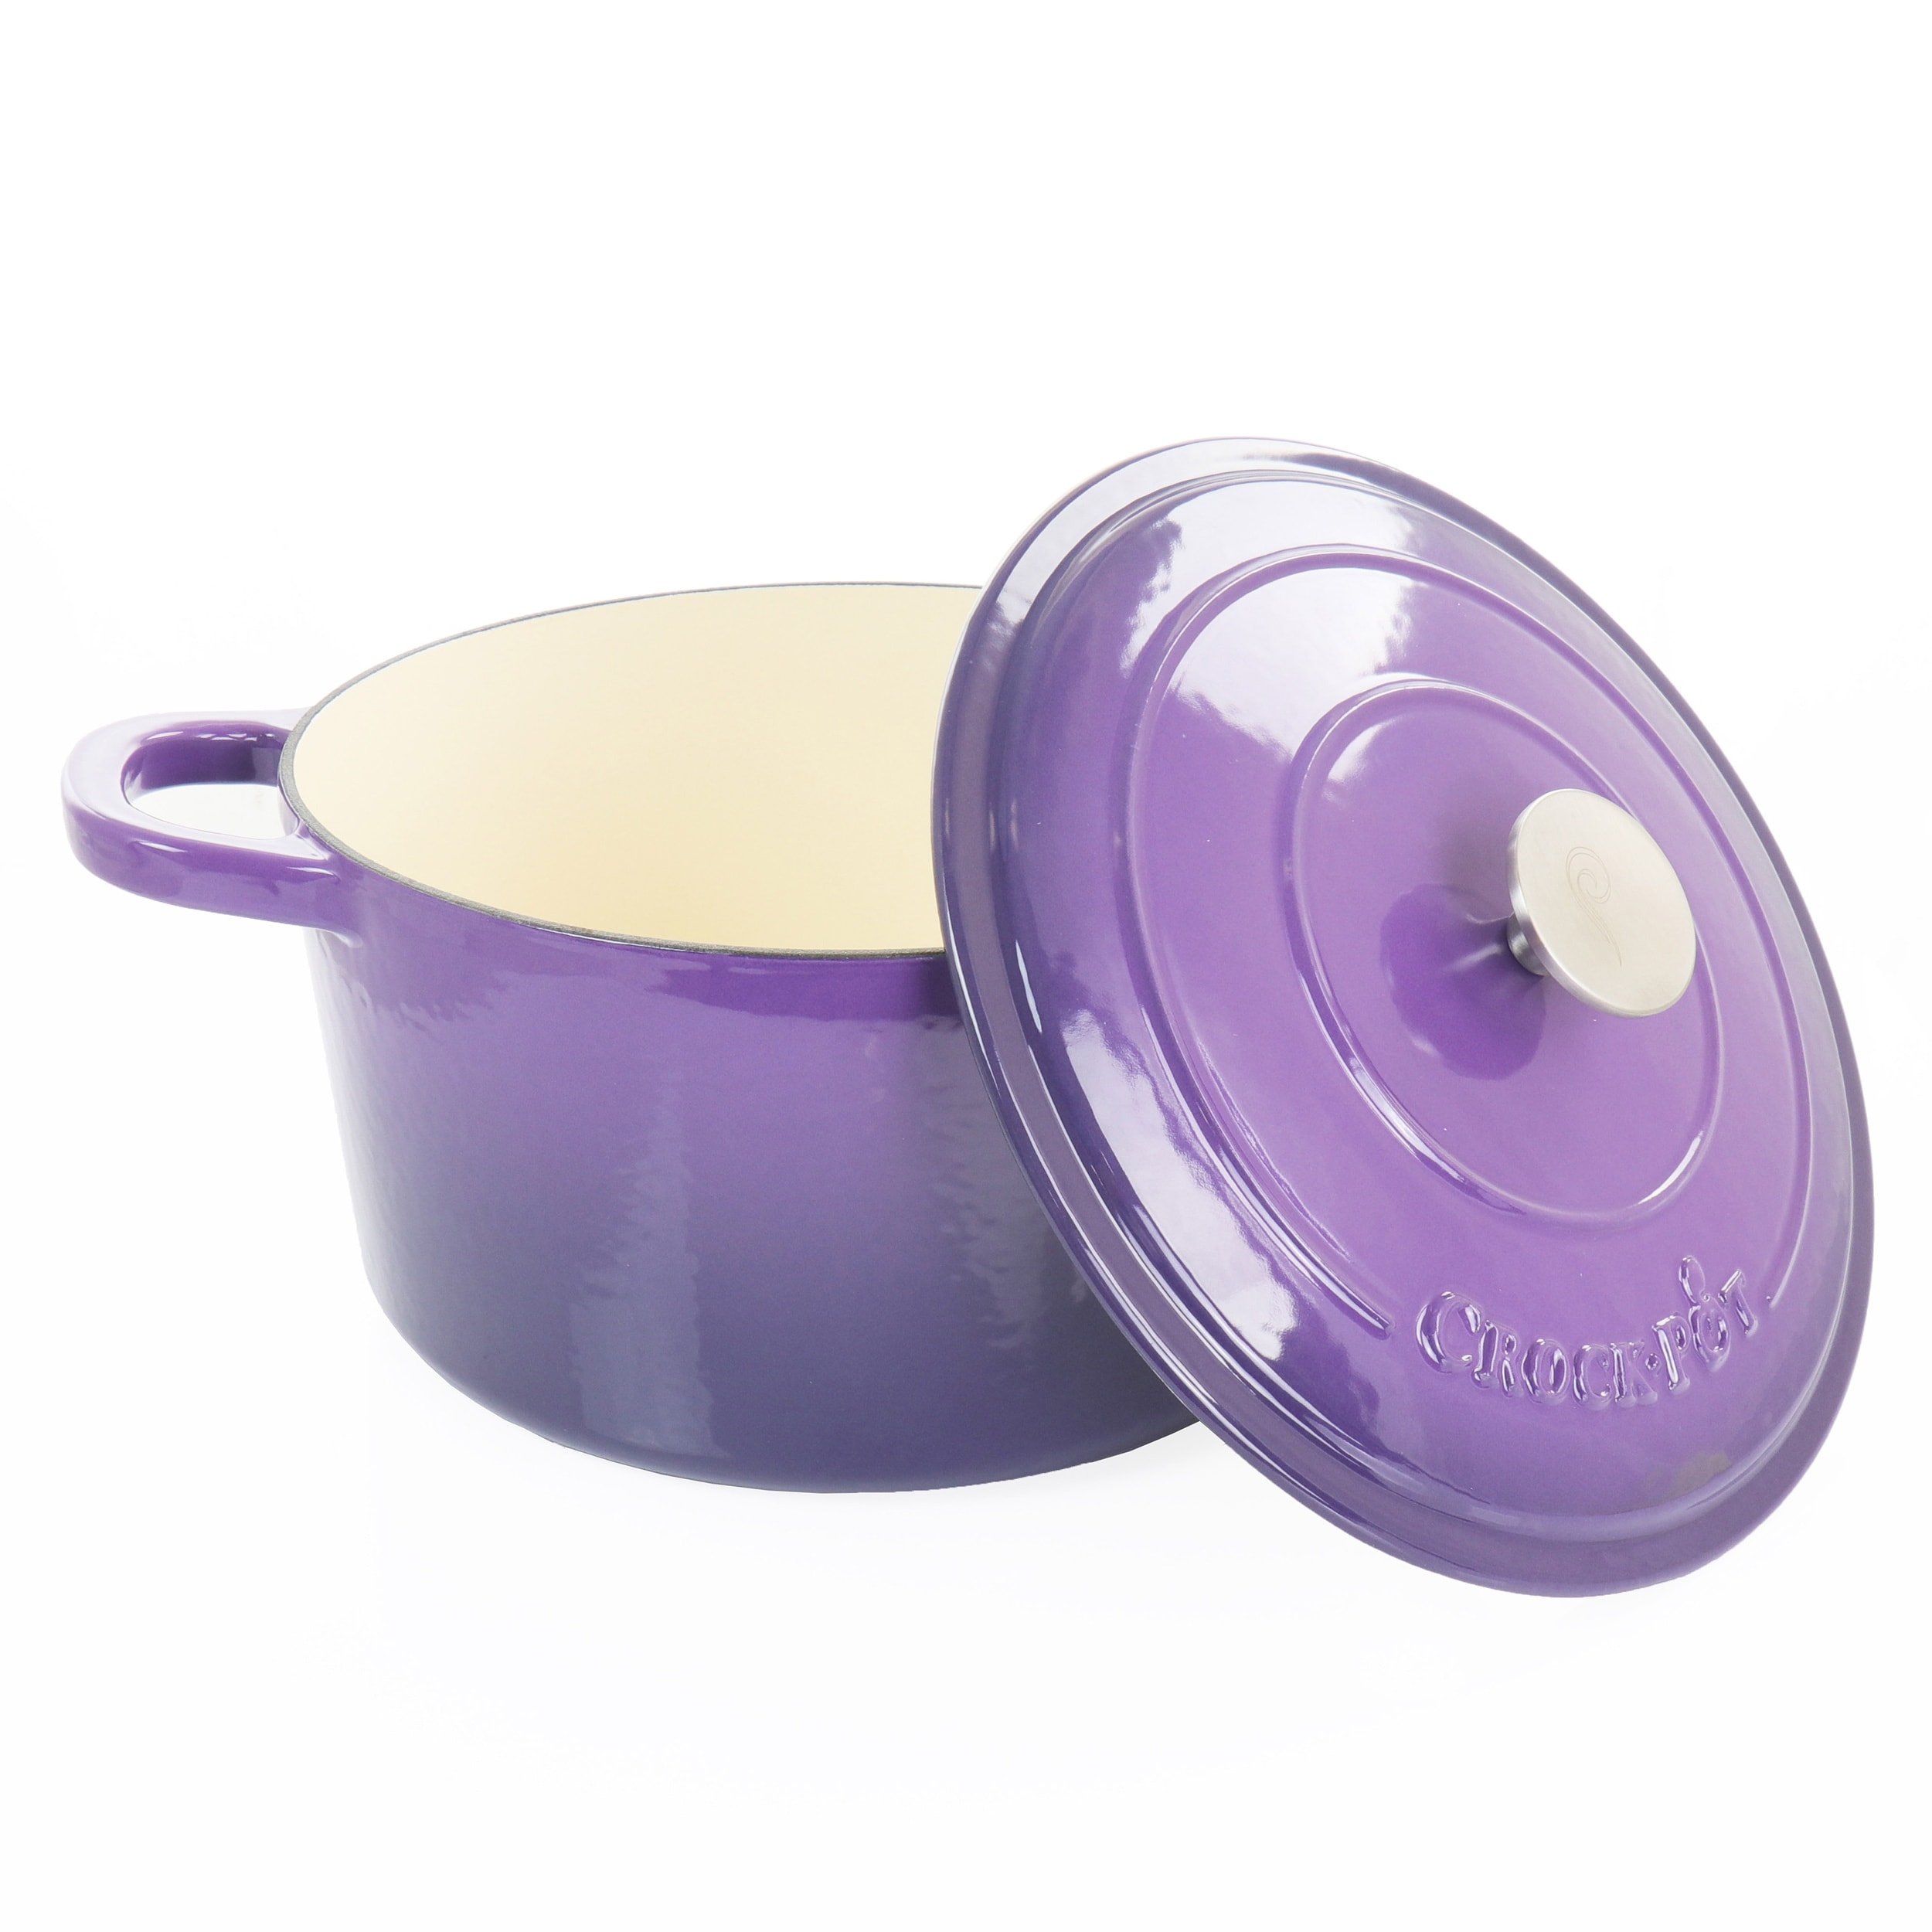 https://ak1.ostkcdn.com/images/products/is/images/direct/bbd88879703b6f1921e265f7f6421442fe0c78be/7-Quart-Enameled-Cast-Iron-Dutch-Oven-with-Lid-in-Grape.jpg